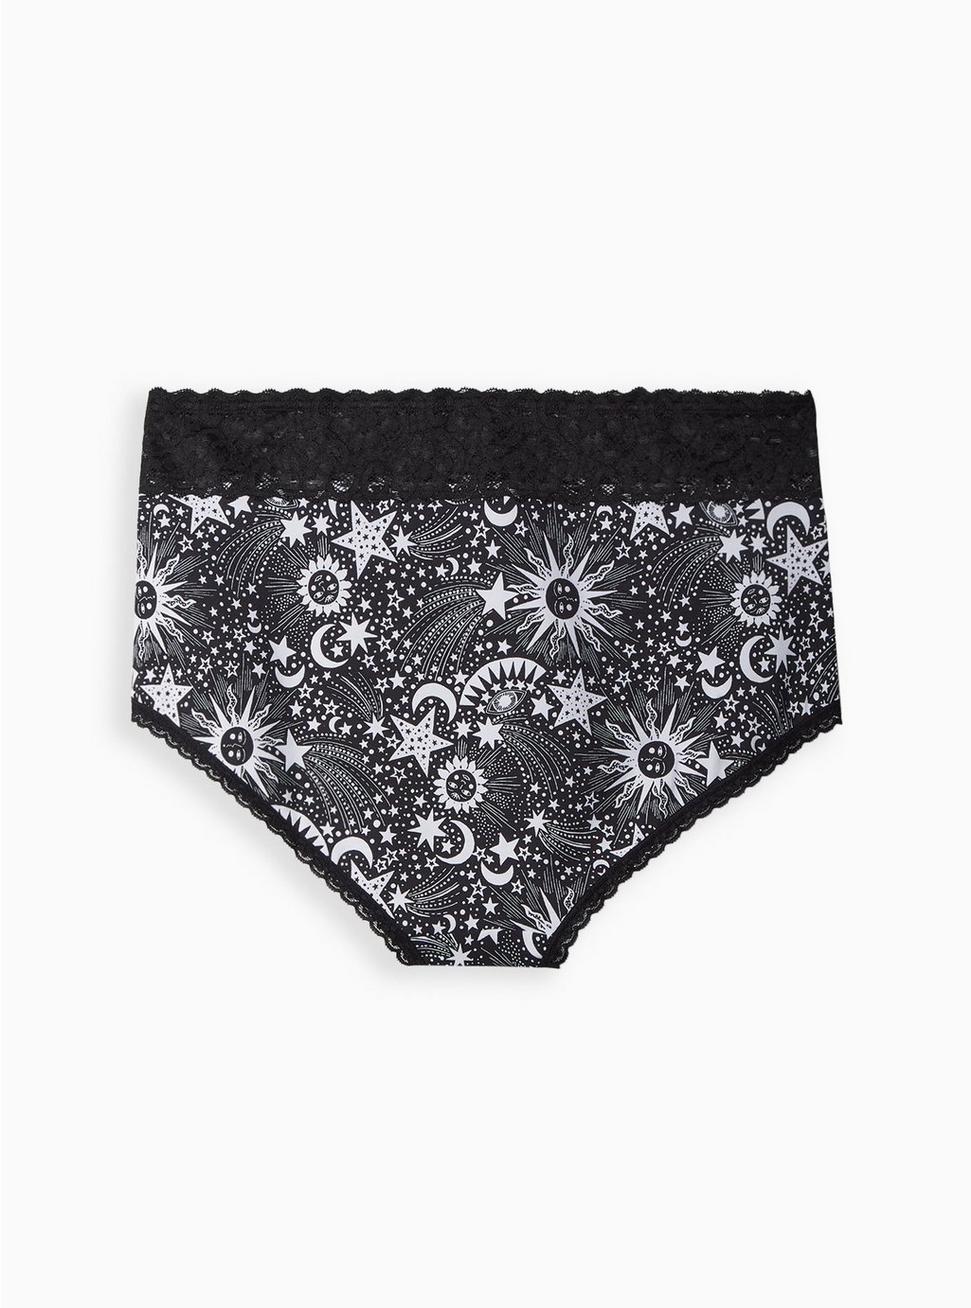 Cotton Mid-Rise Brief Lace Trim Panty, HEART OF GOLD BLACK, alternate